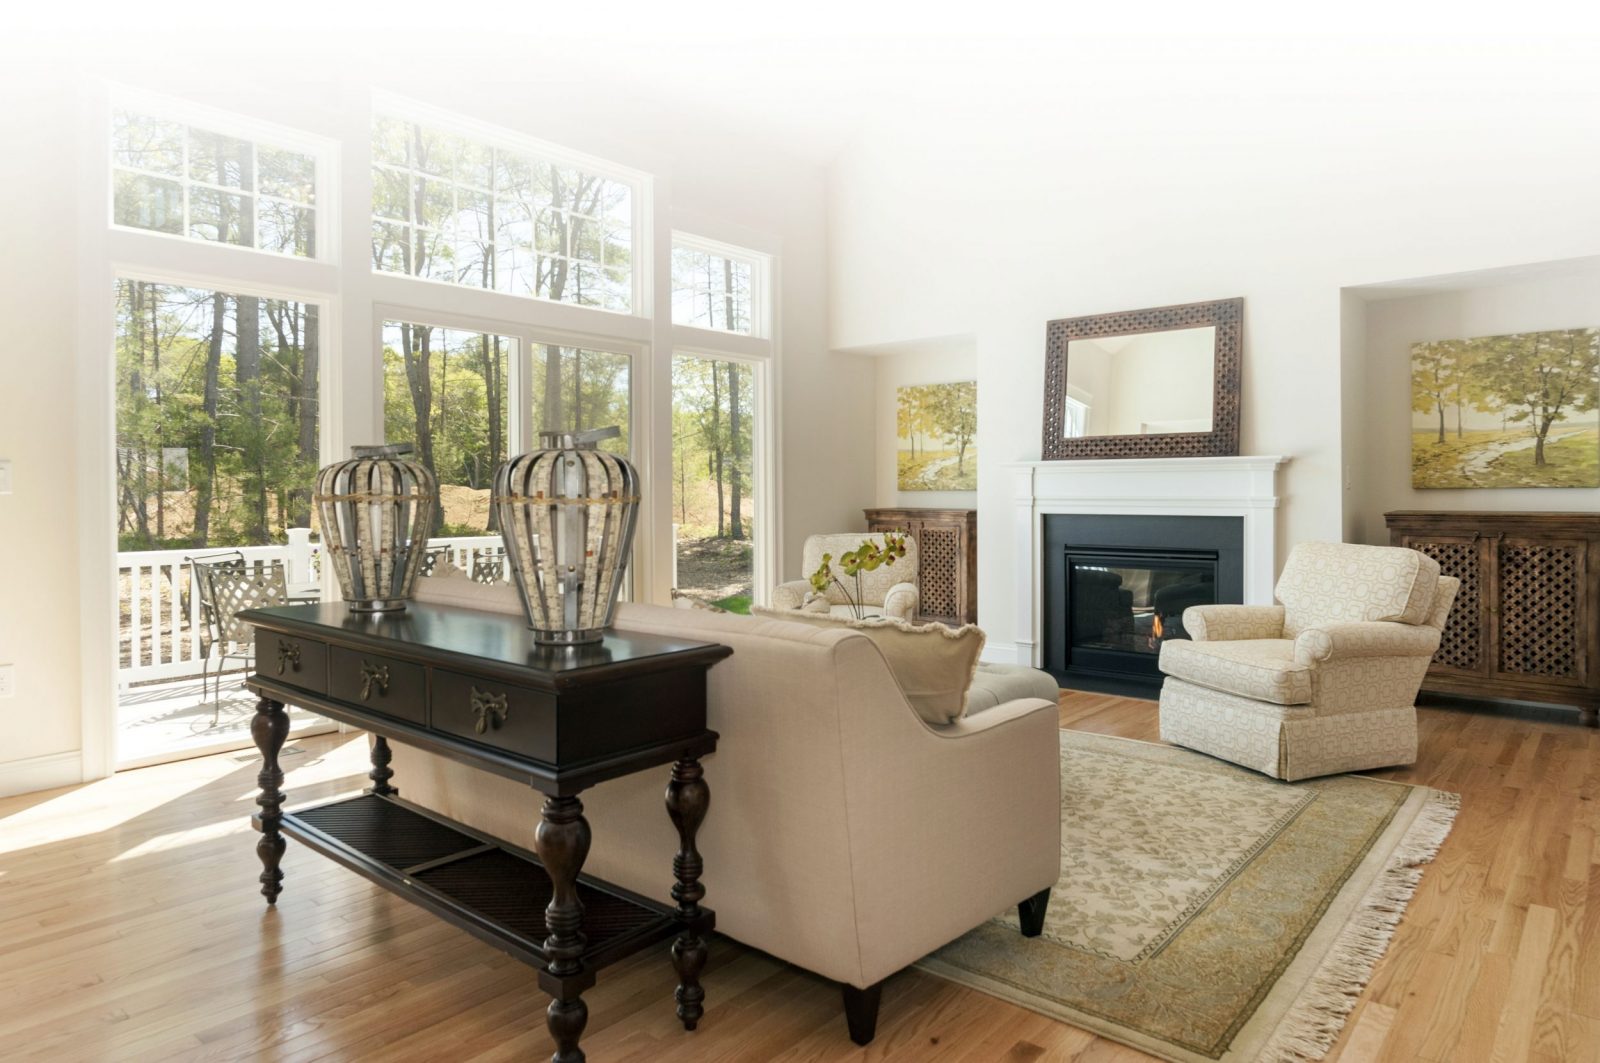 Sweeping ceilings showcase the natural light streaming through oversized windows in this great room at Duxbury Woods. An open floor plan allows this view from all angles as soon as you walk in the door. 
